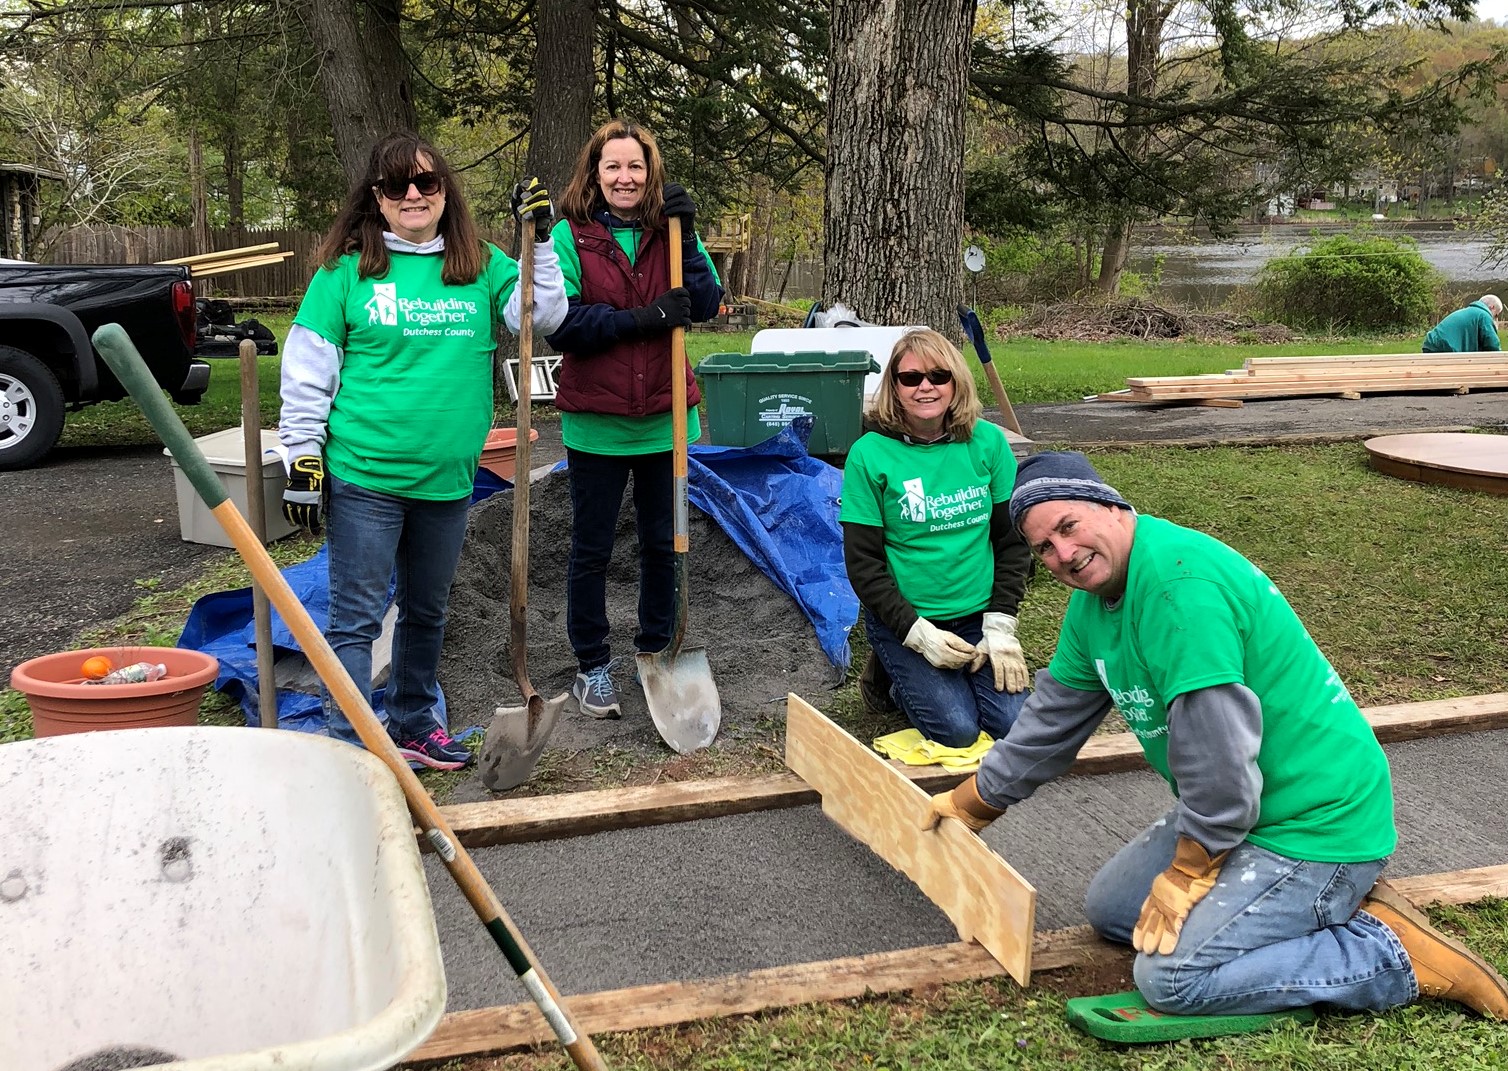 Volunteers repair the walkway for a Dutchess County resident this past April, thanks to Rebuilding Together’s Rebuilding Day program.